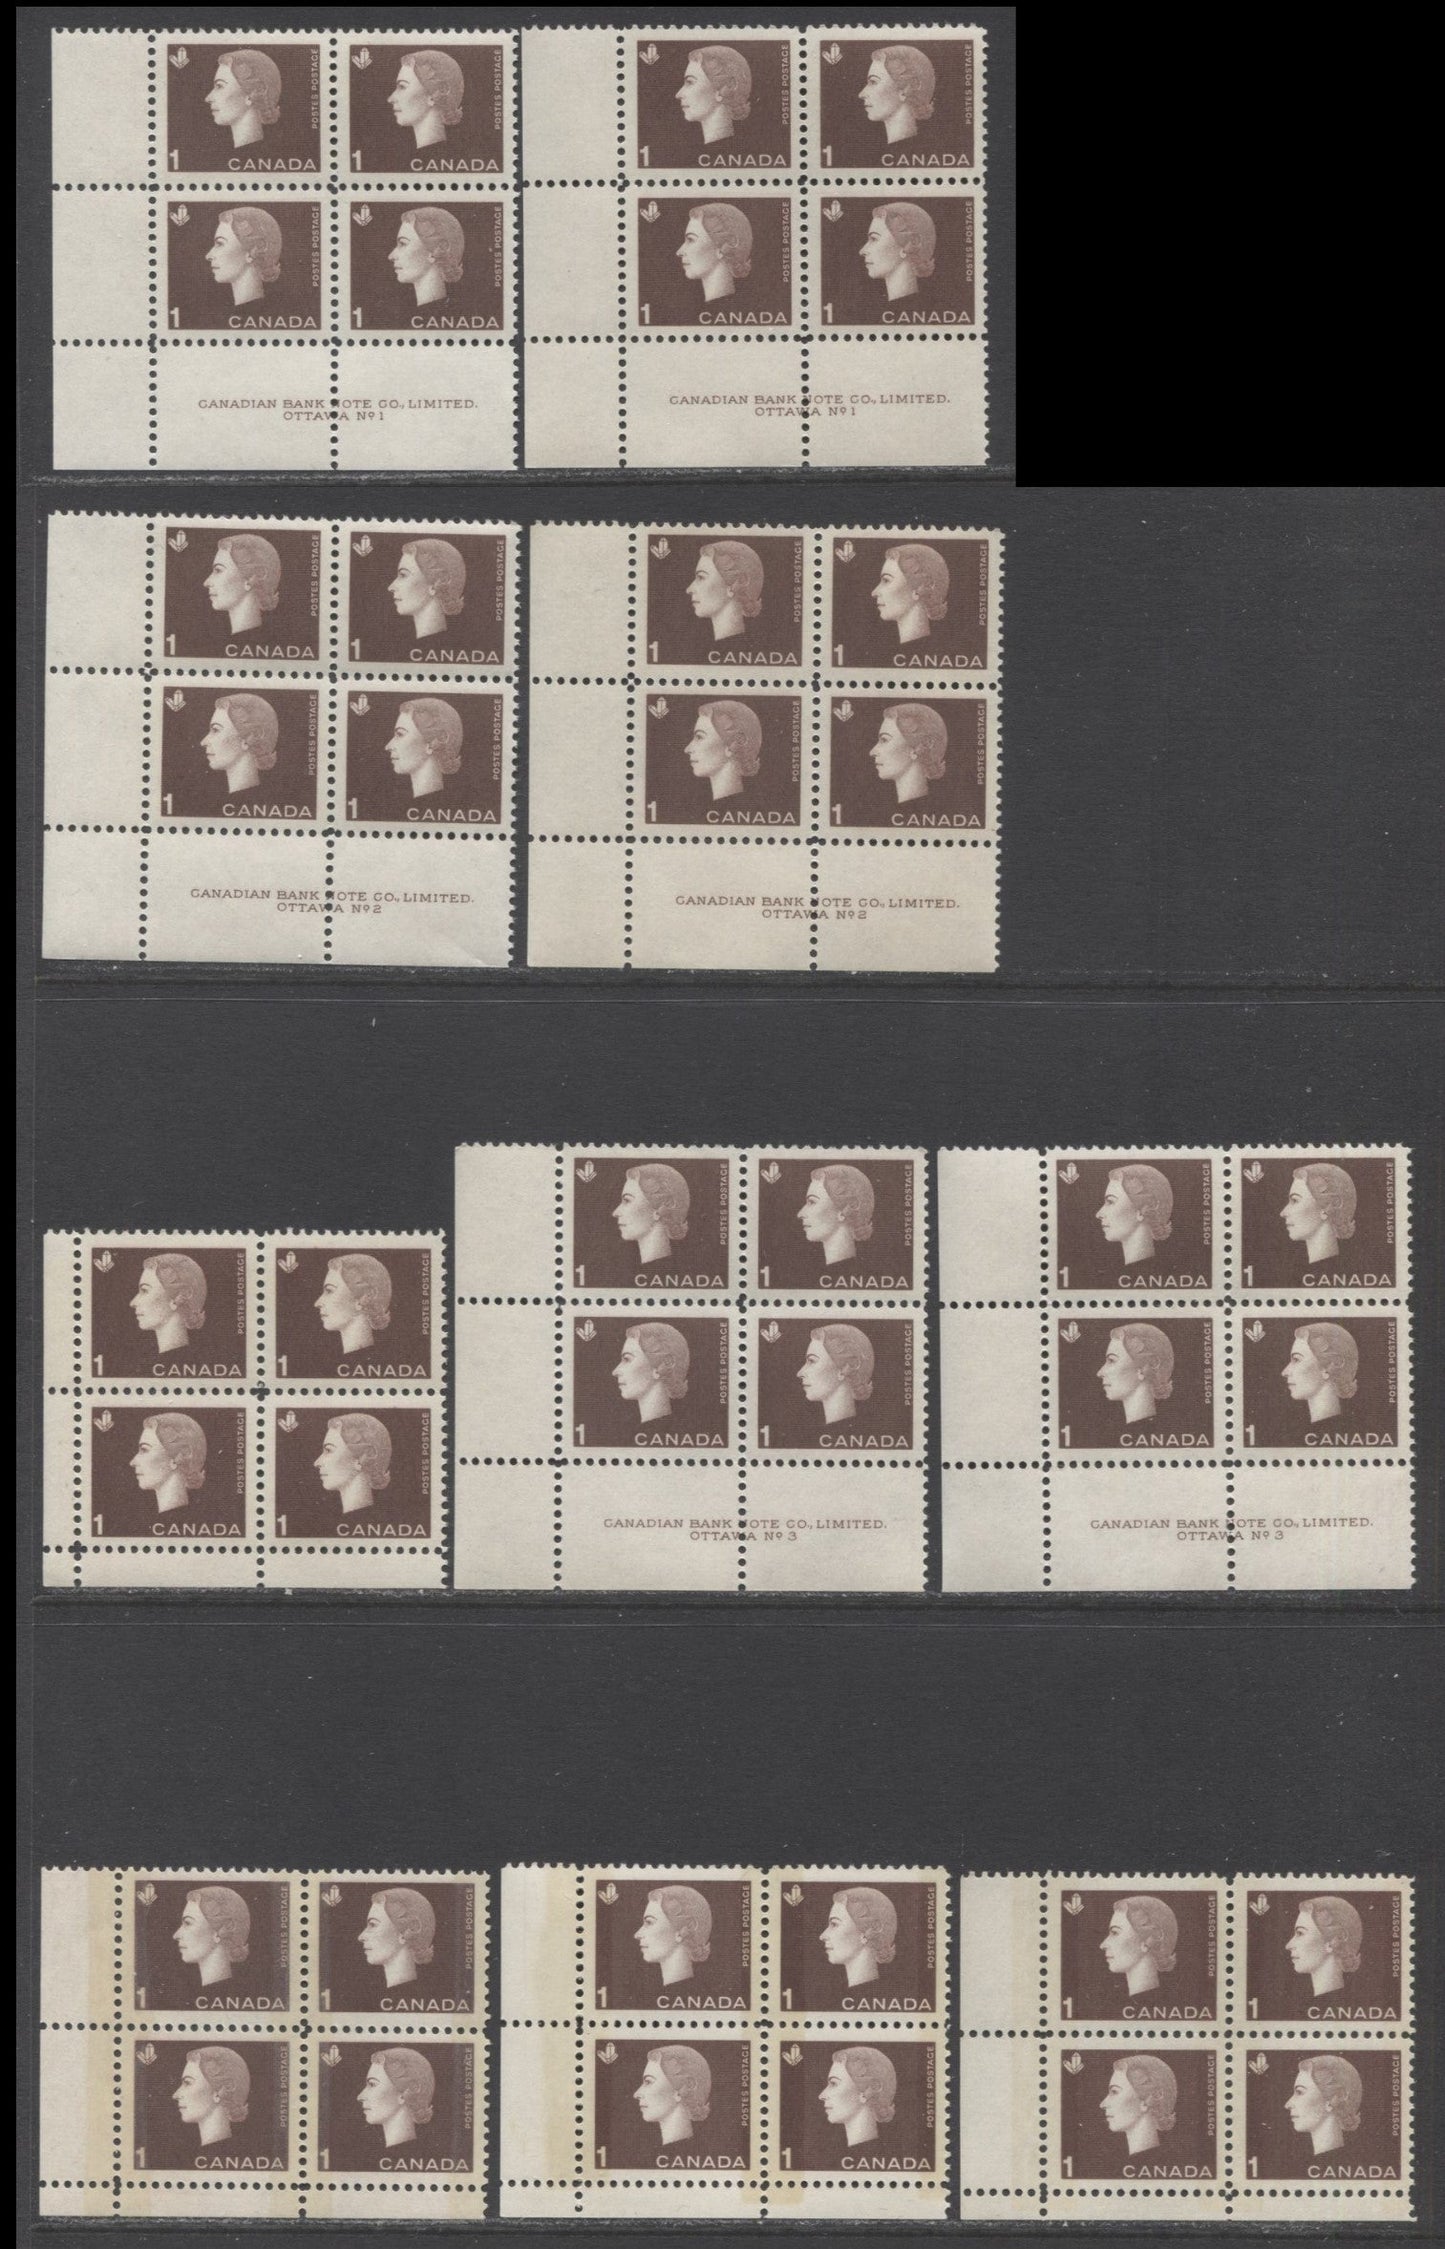 Lot 73 Canada #401,p 1c Brown Crystals, 1962-1963 Cameo Issue, 10 VFNH LL Plates 1-3 Tagged & Untagged Blocks Of 4 With Different Papers, Perfs And Gums